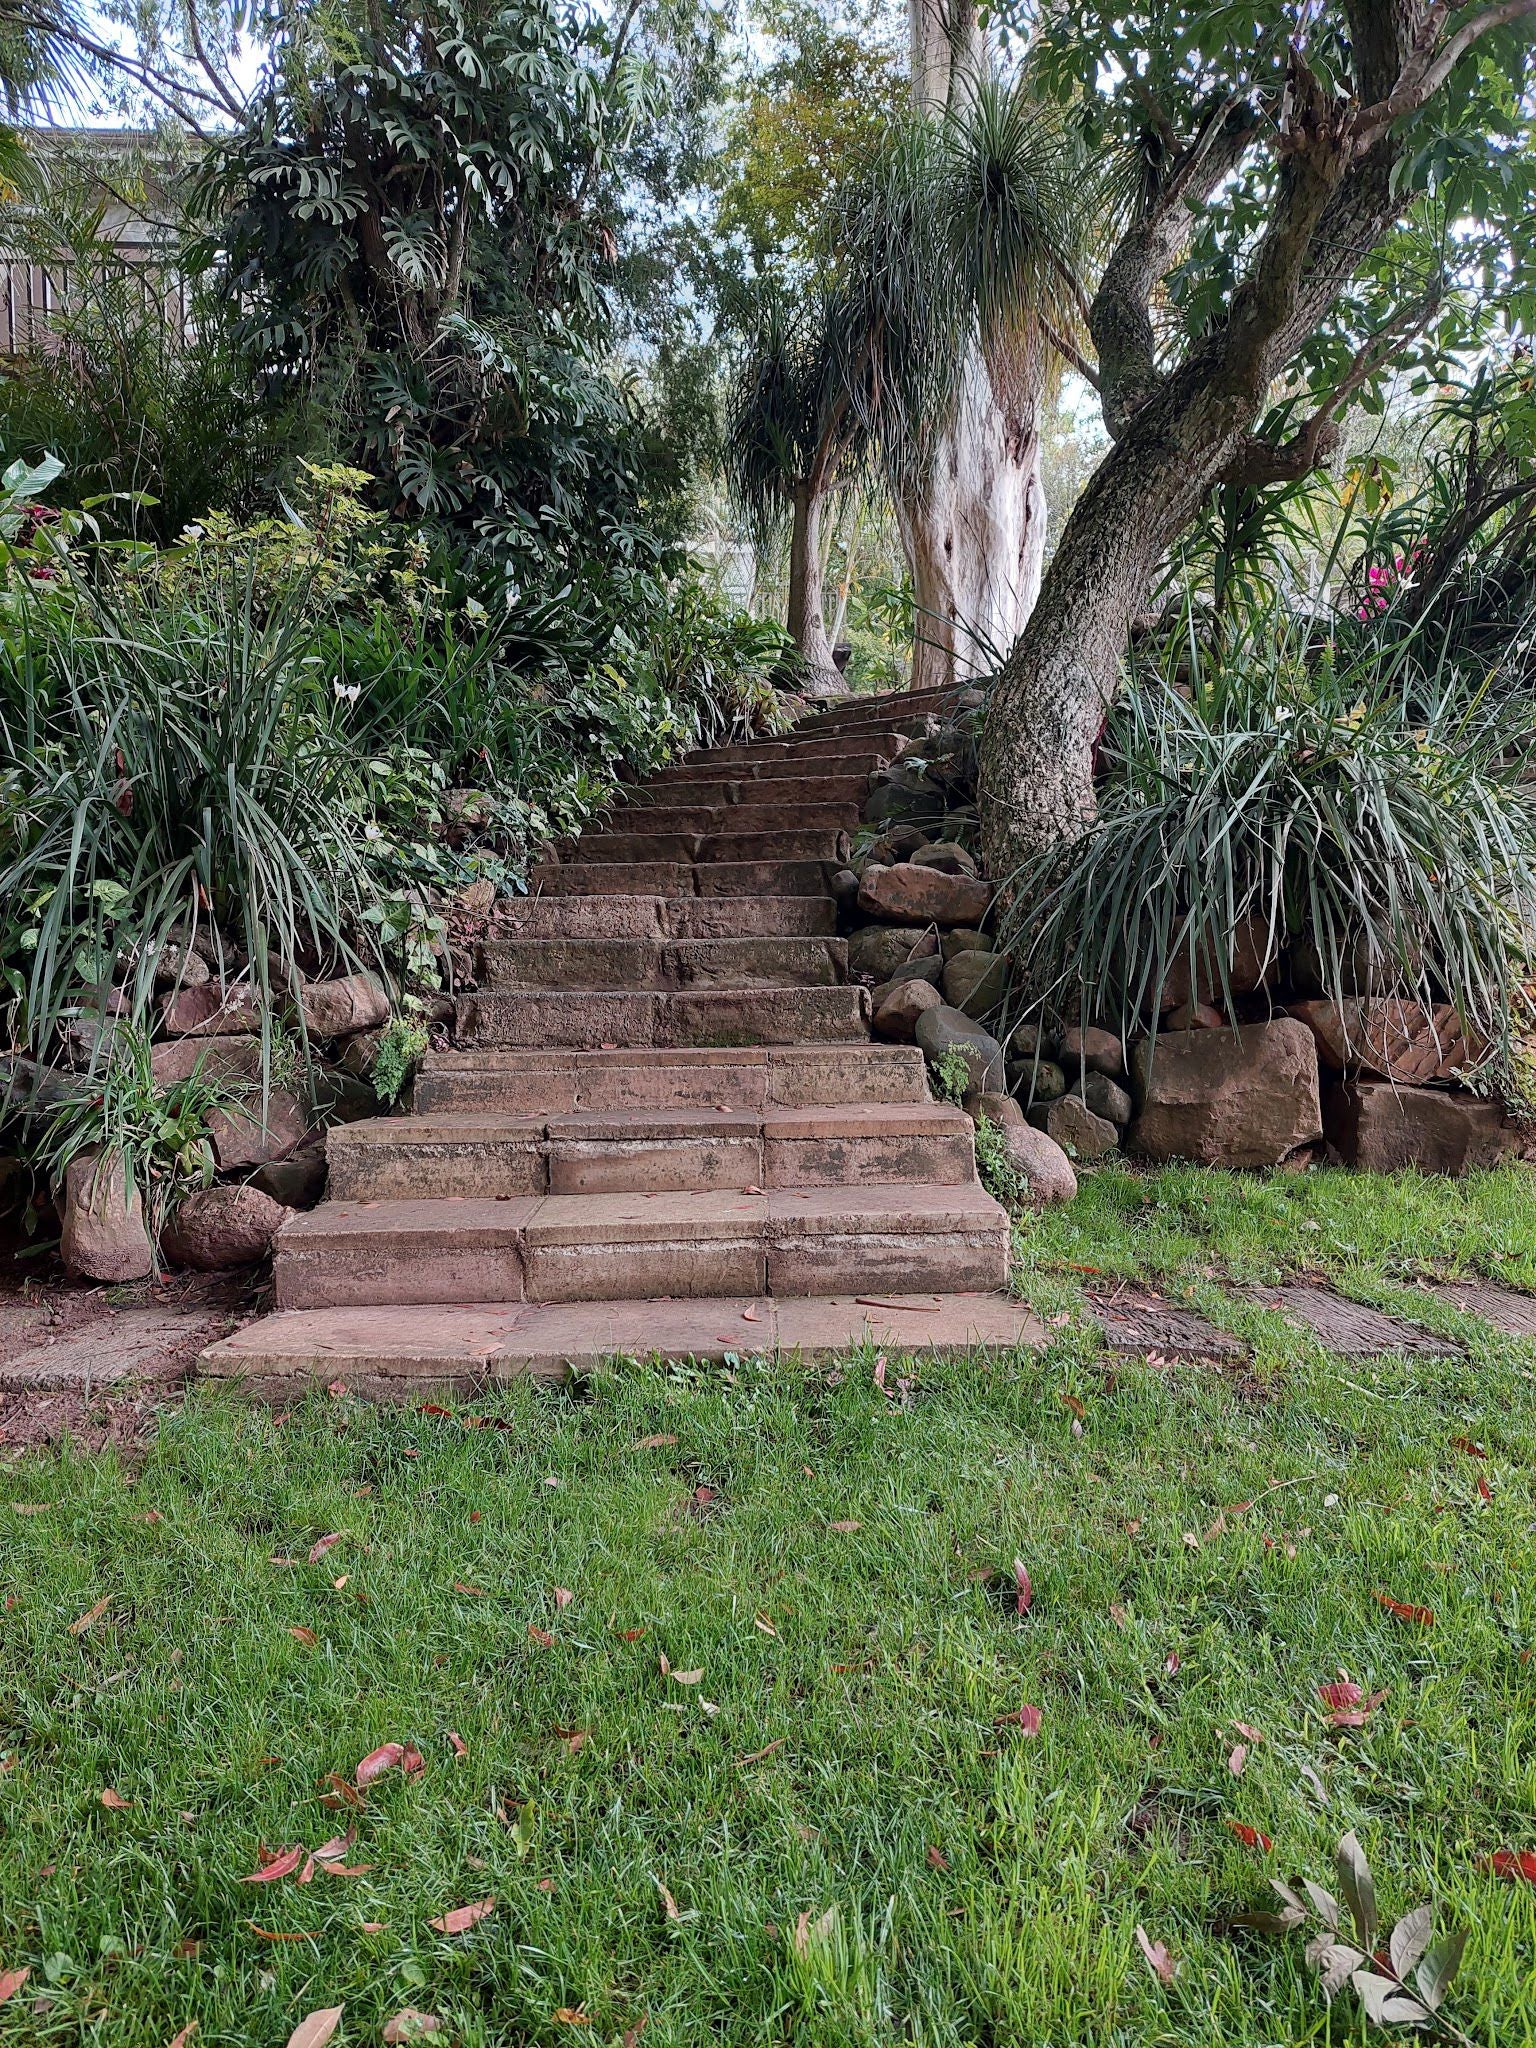 Macnut Farm Wedding And Function Venue Assagay Durban Kwazulu Natal South Africa Palm Tree, Plant, Nature, Wood, Stairs, Architecture, Garden